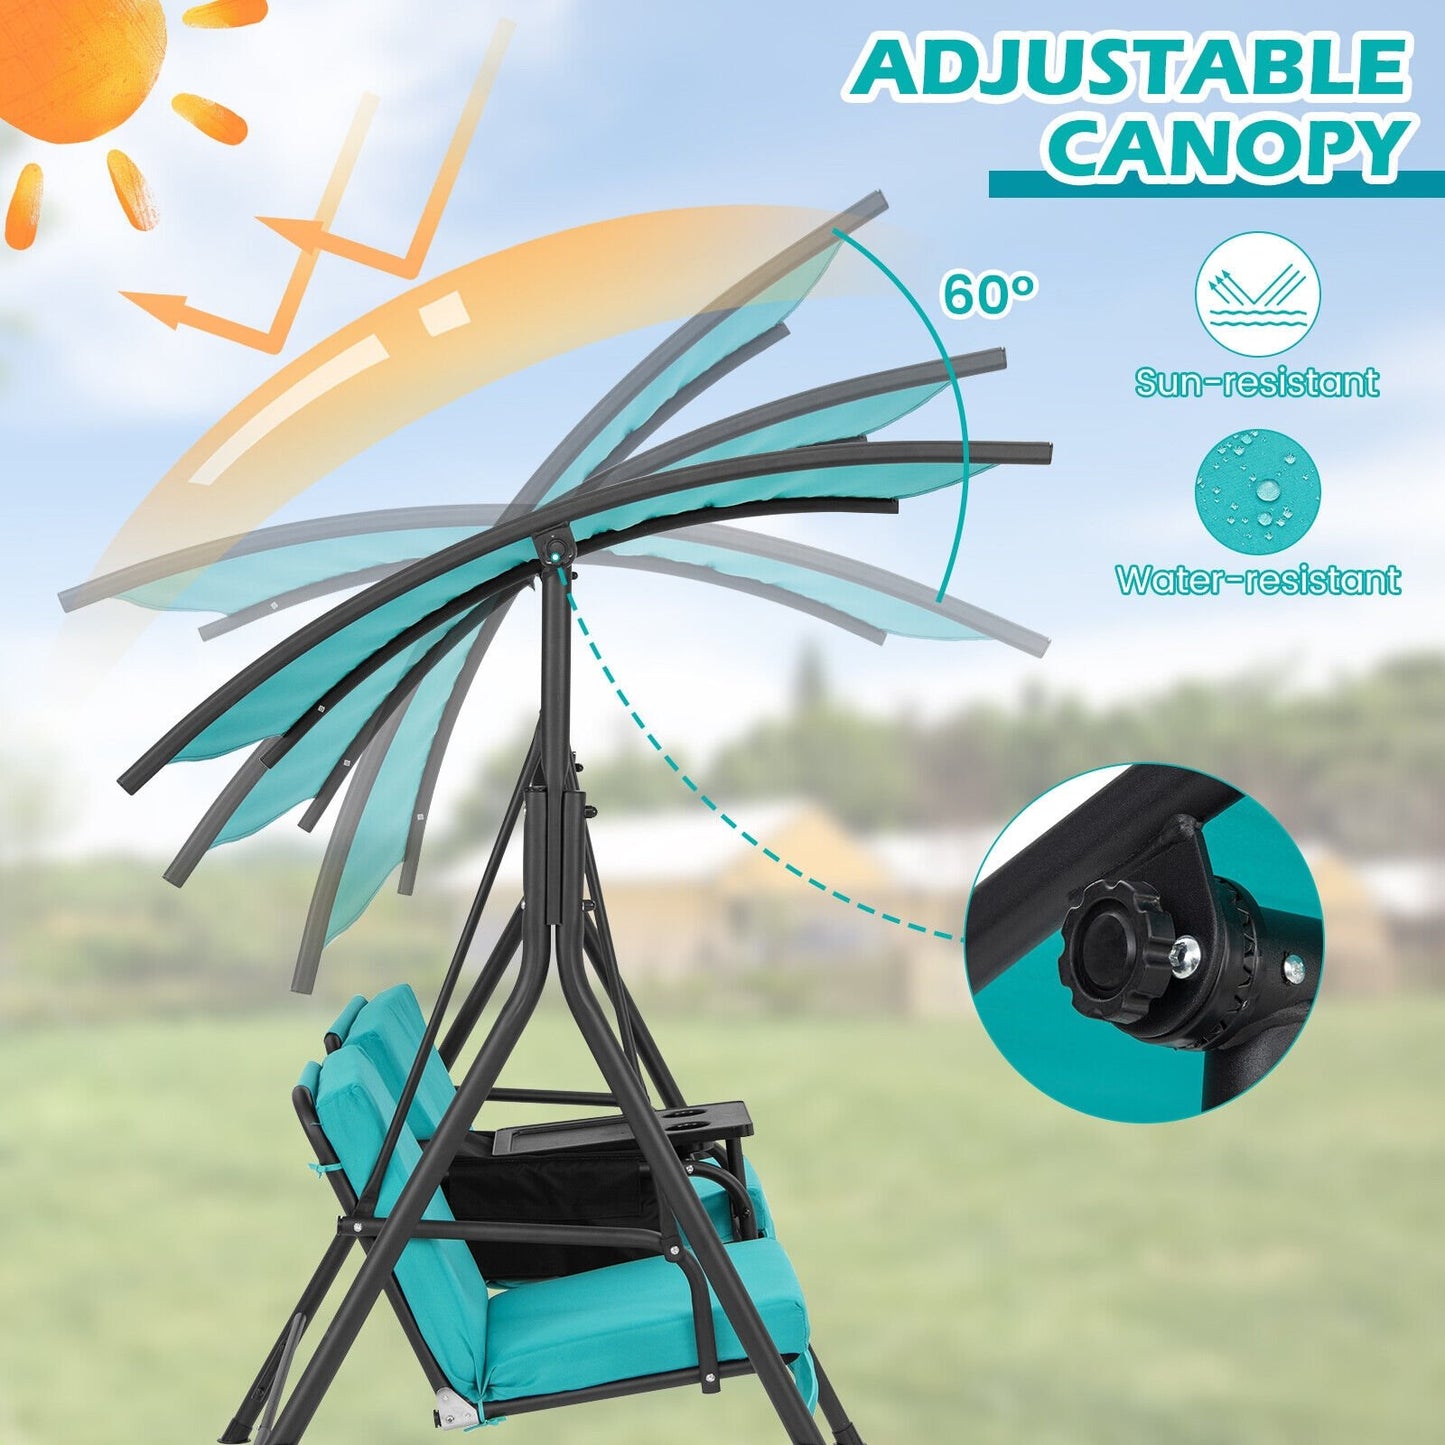 Porch Swing Chair with Adjustable Canopy, Turquoise